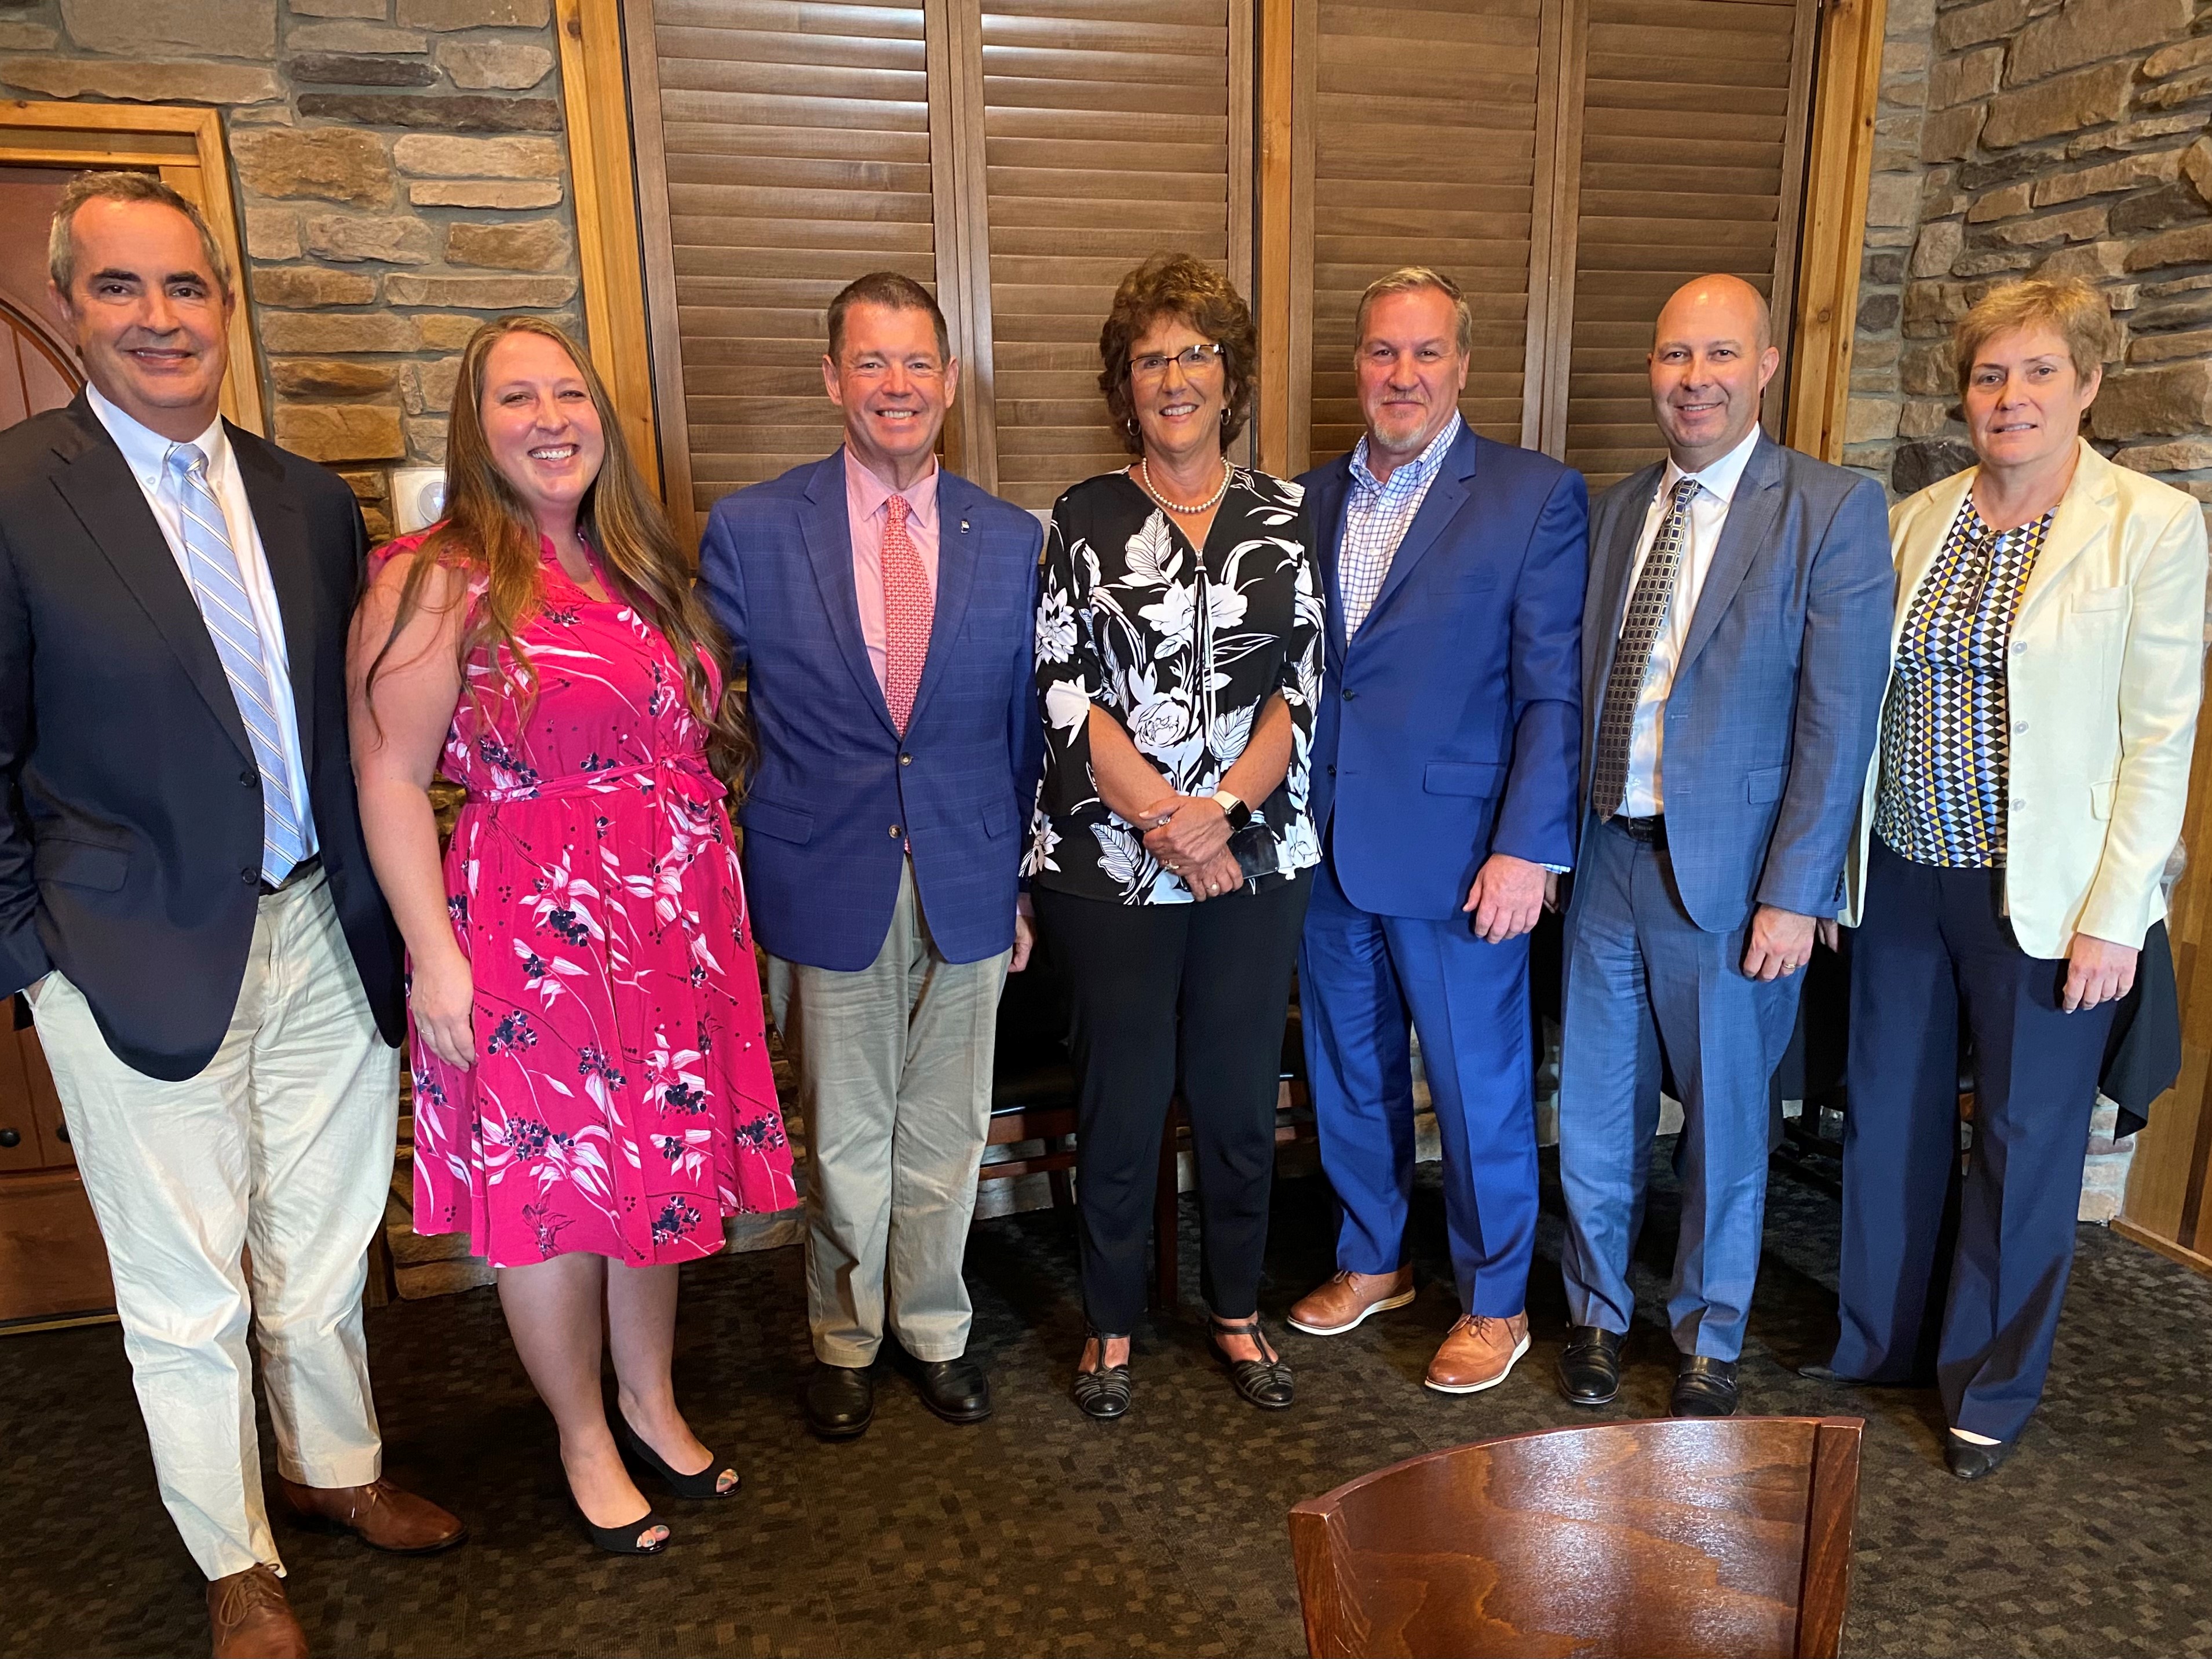 NABPAC co-hosted a fundraiser for Rep. Jackie Walorski (IN-02) with Dave Arland and the Indiana Broadcasters Association raising $7,600.